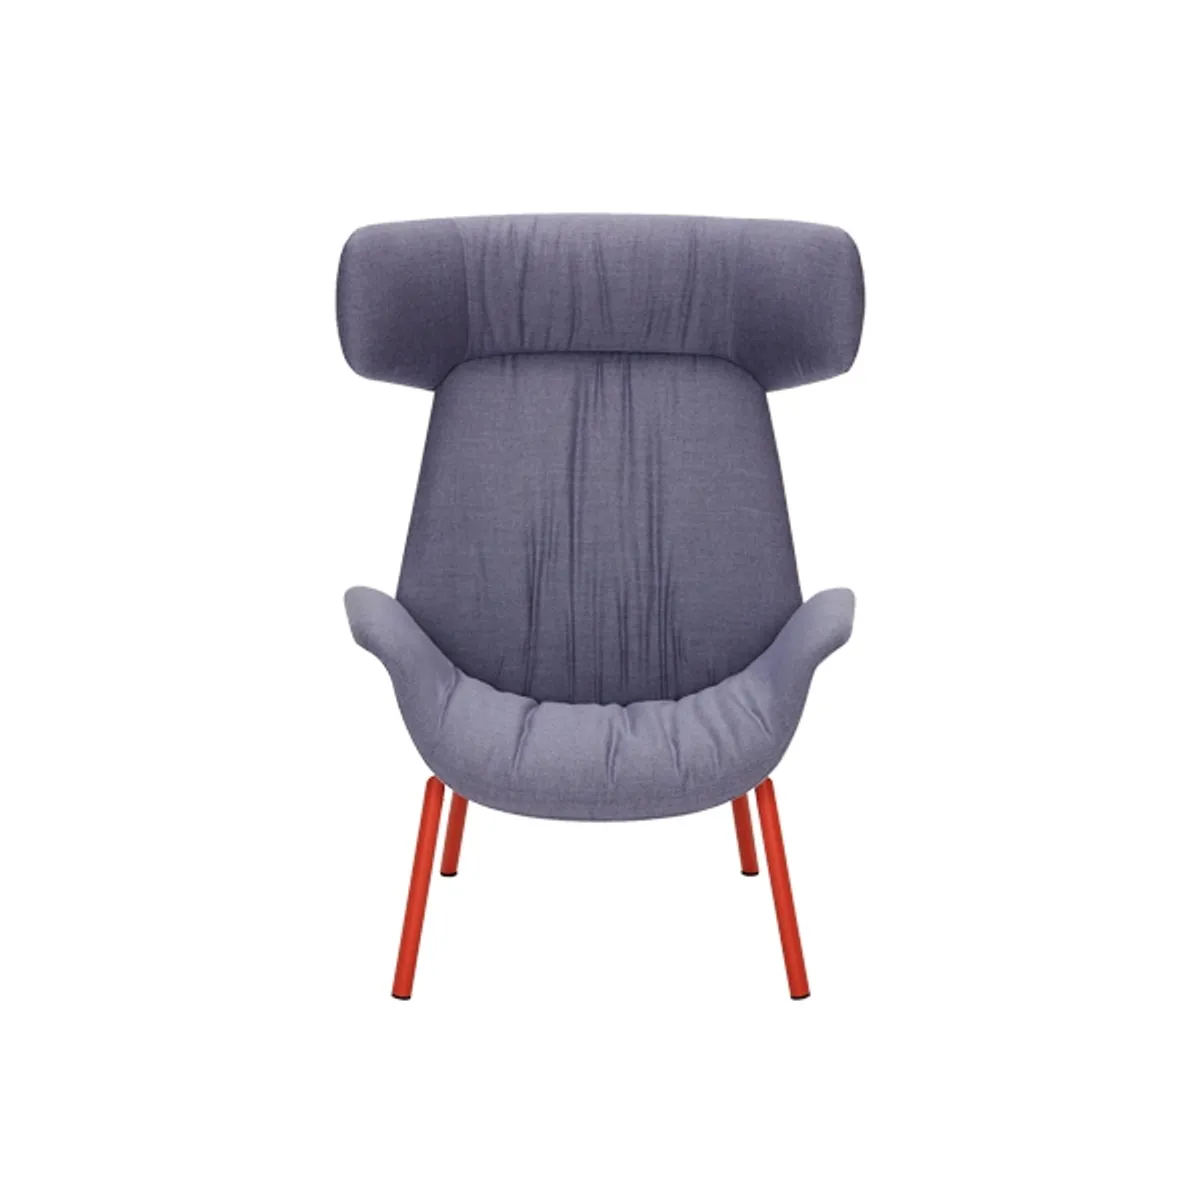 Ilawingbackloungechair Inside Out Contracts3